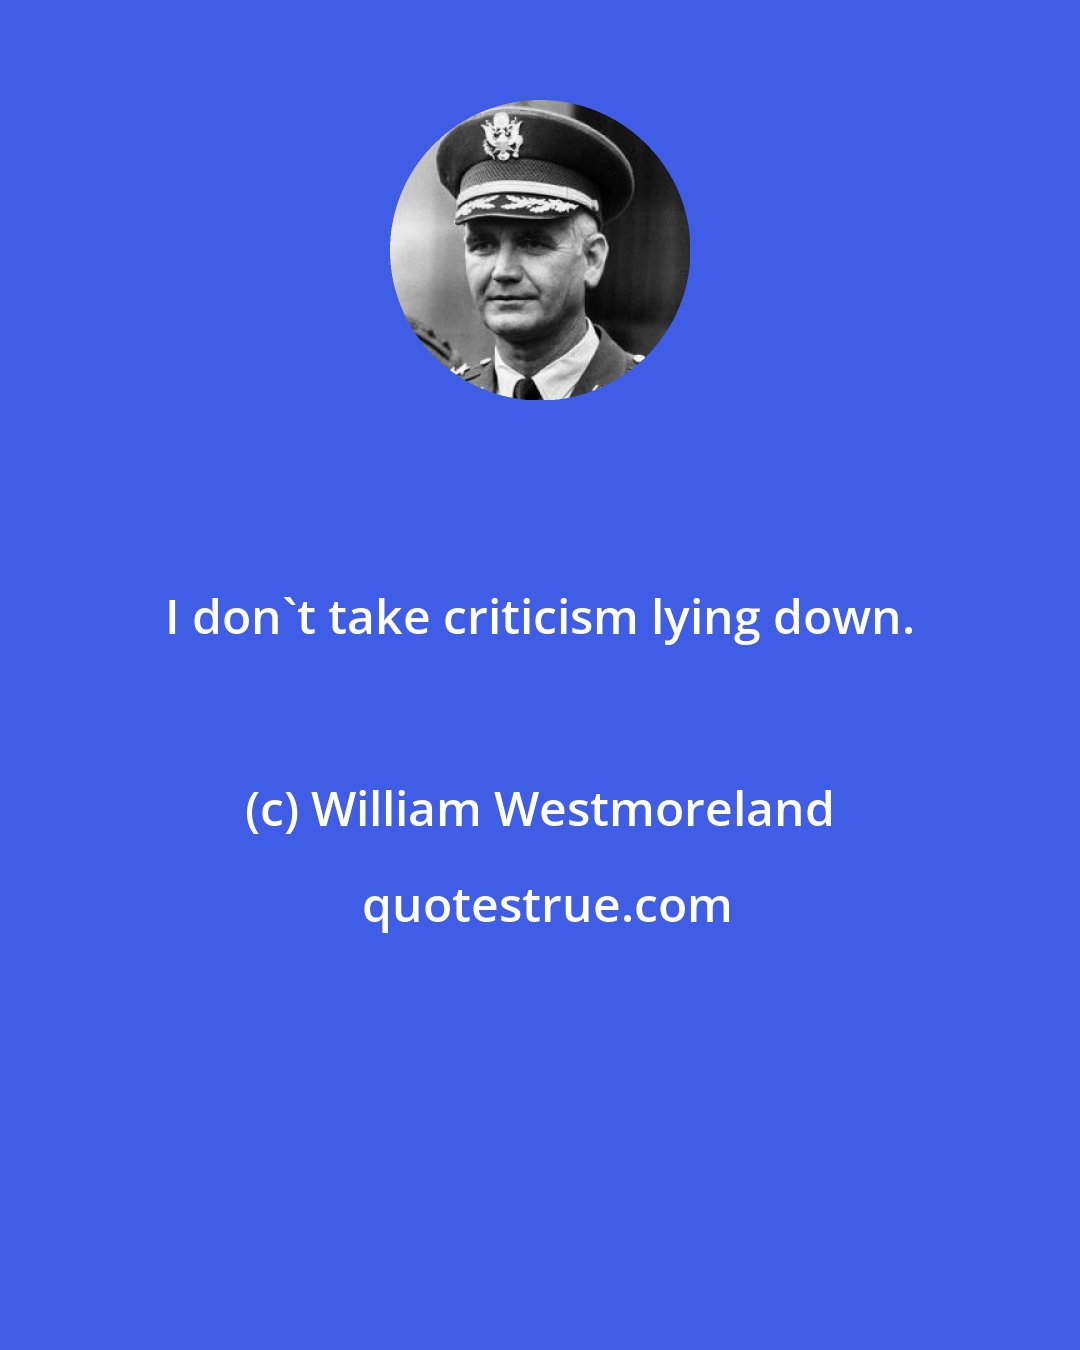 William Westmoreland: I don't take criticism lying down.